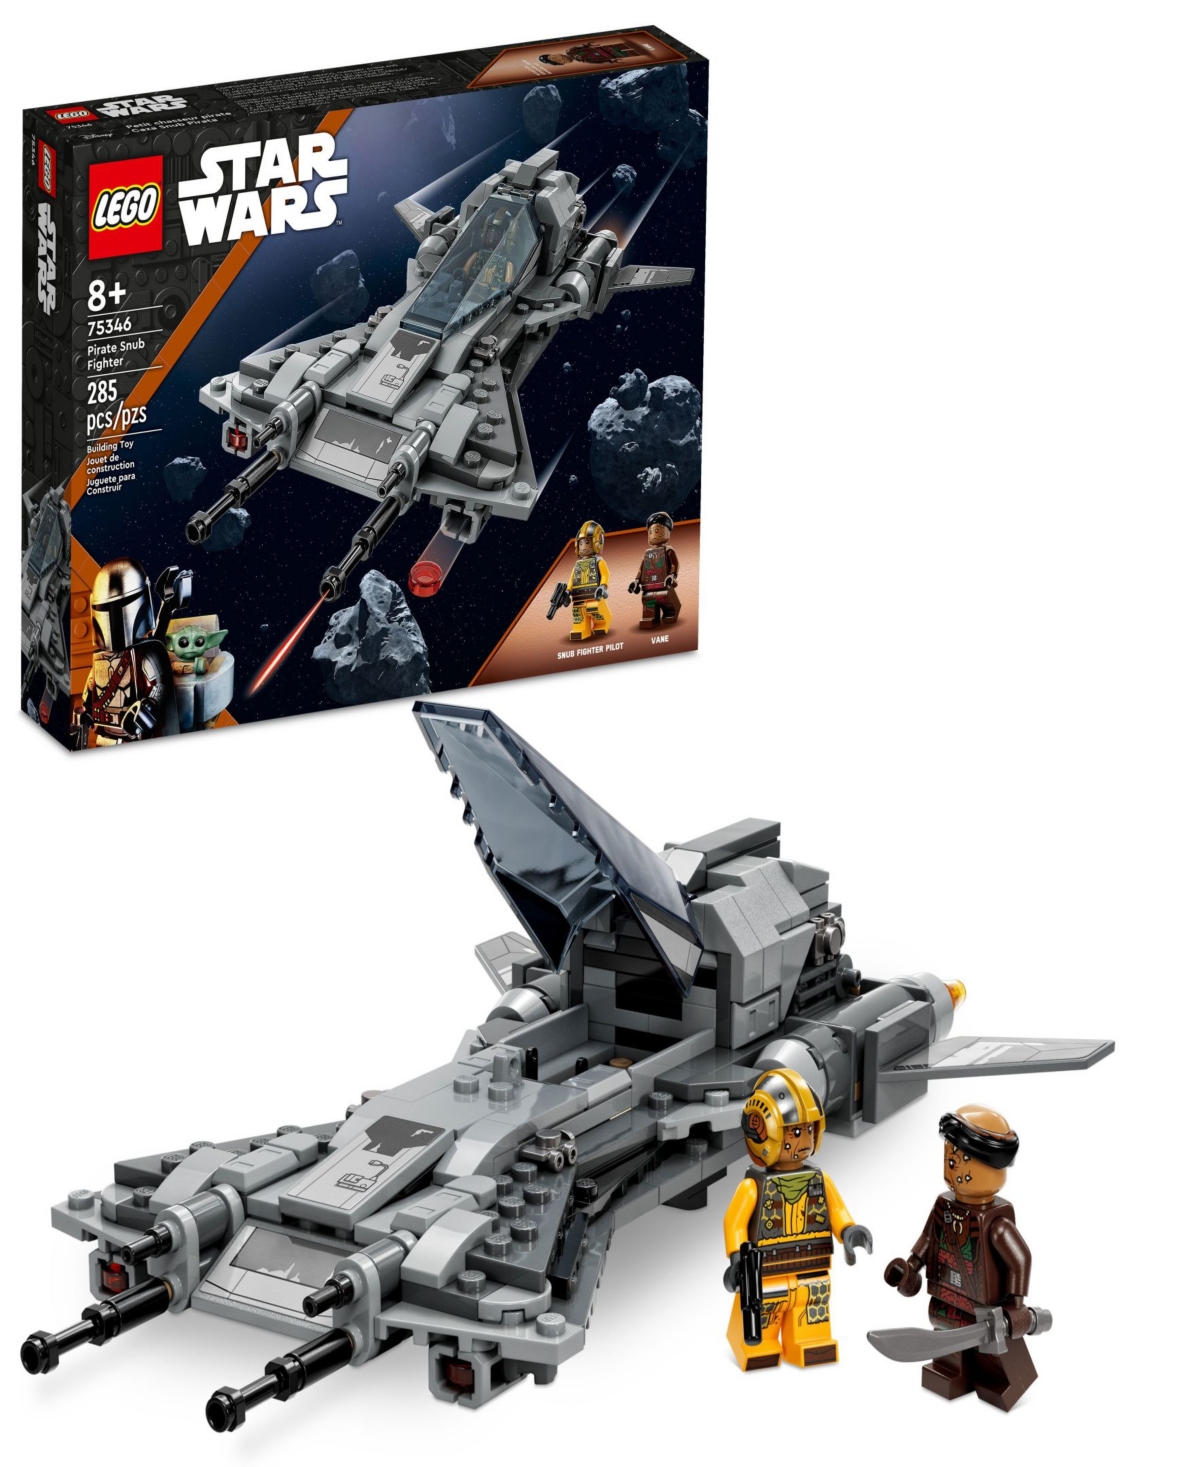 Lego Star Wars Pirate Snub Fighter 75346 Building Set, 285 Pieces In Multicolor